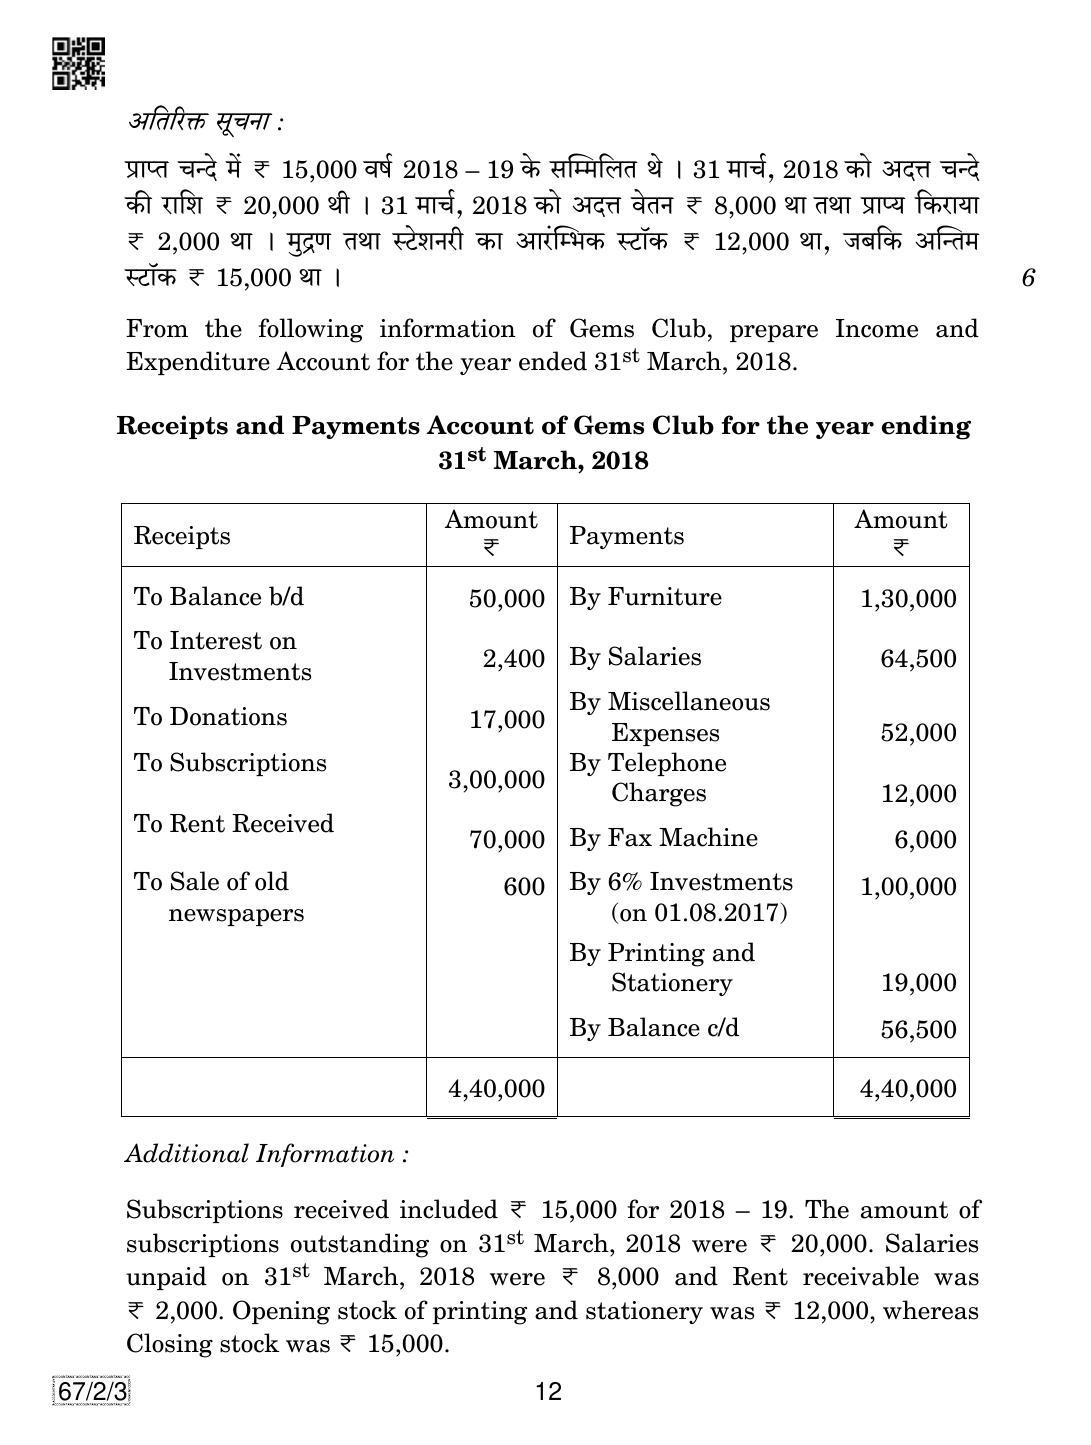 CBSE Class 12 67-2-3 Accountancy 2019 Question Paper - Page 12